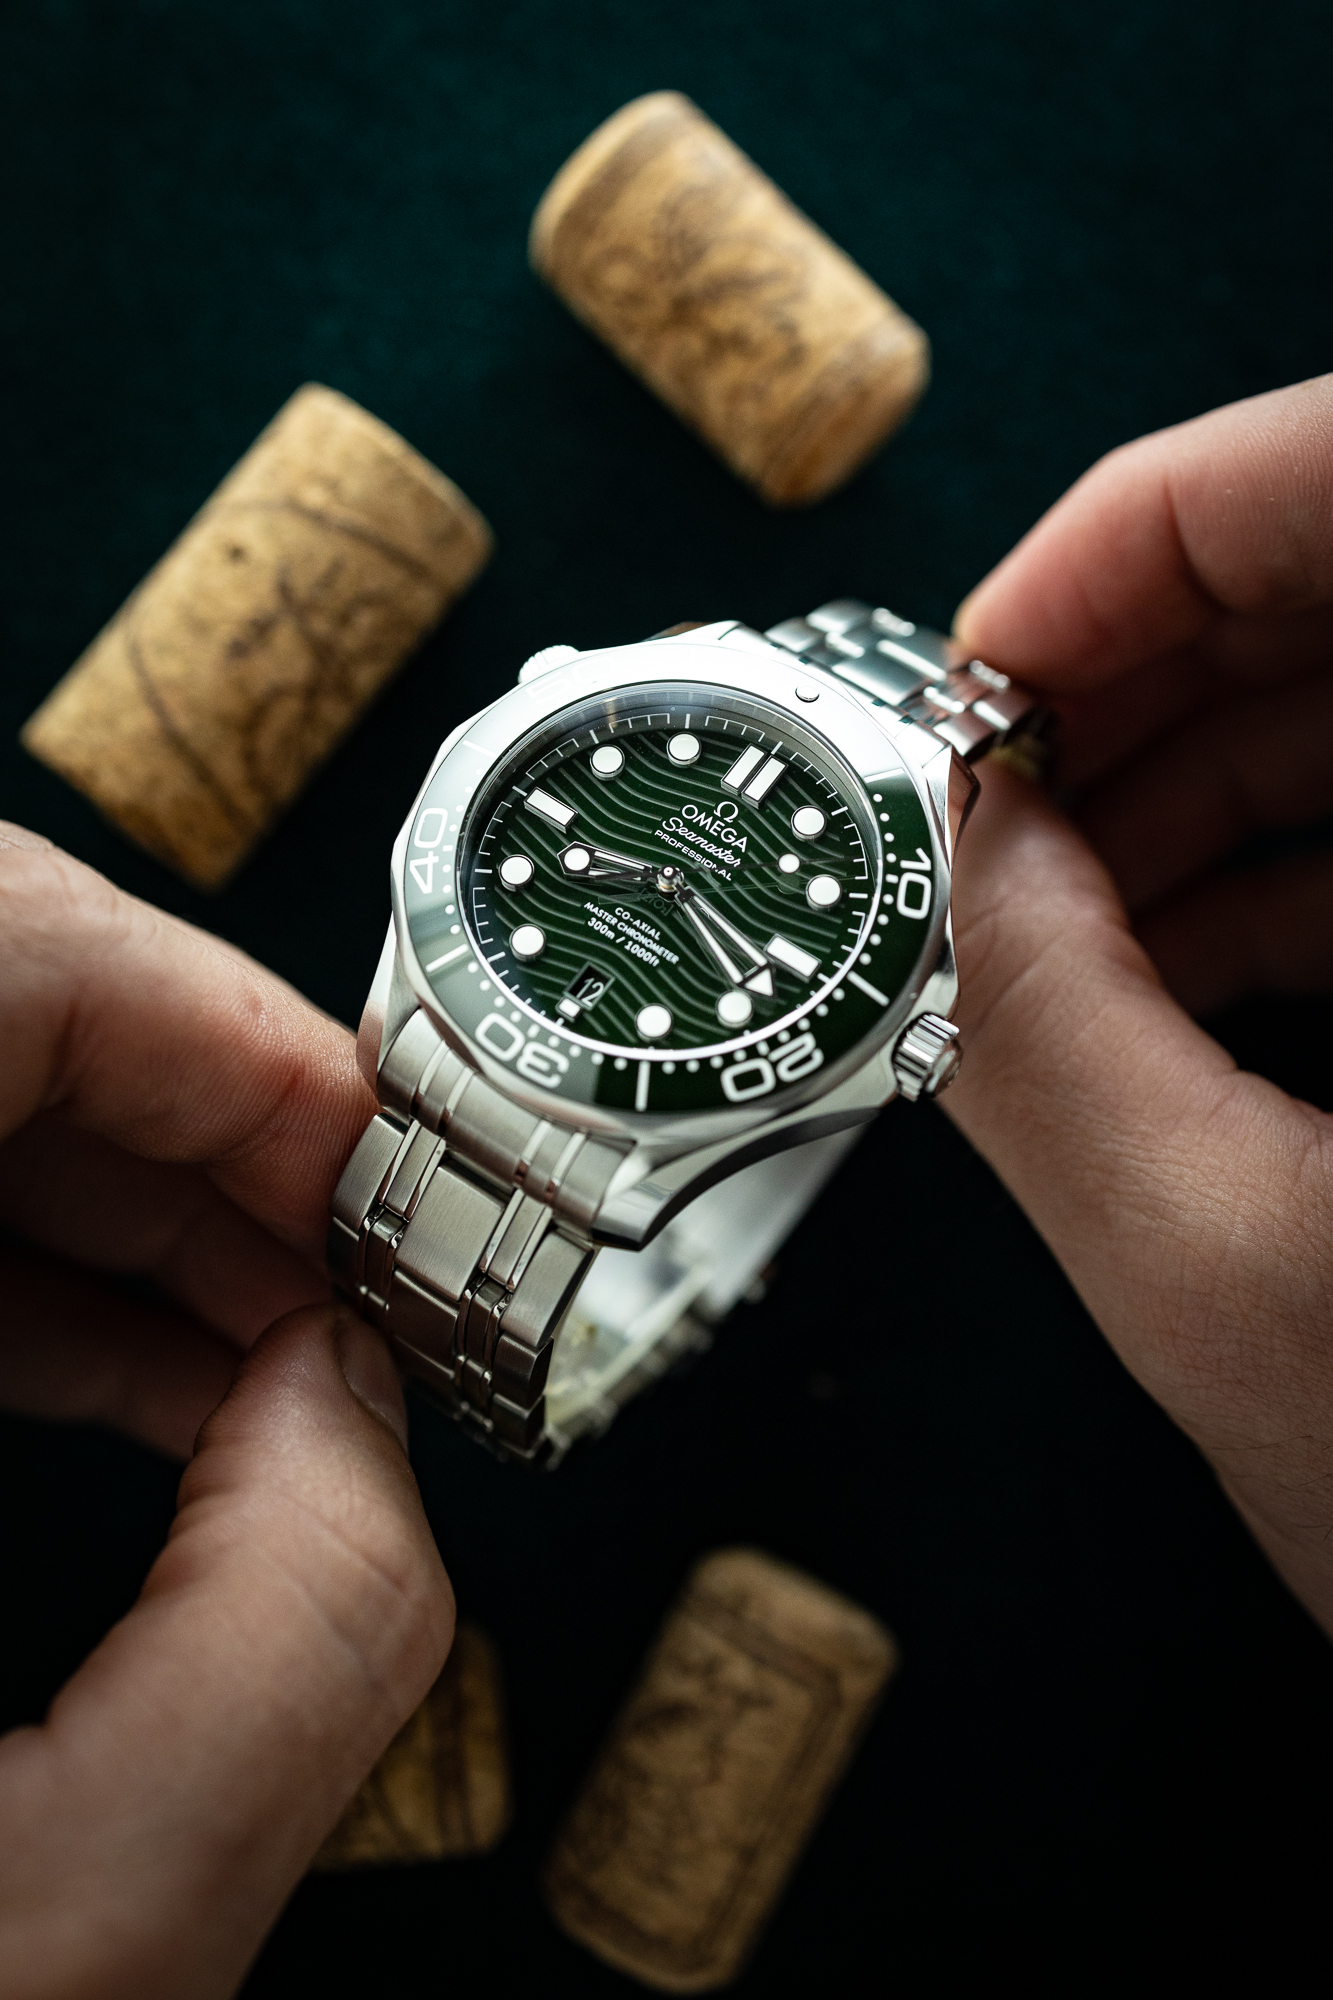 Our Top Green Watches for St. Patrick’s Day